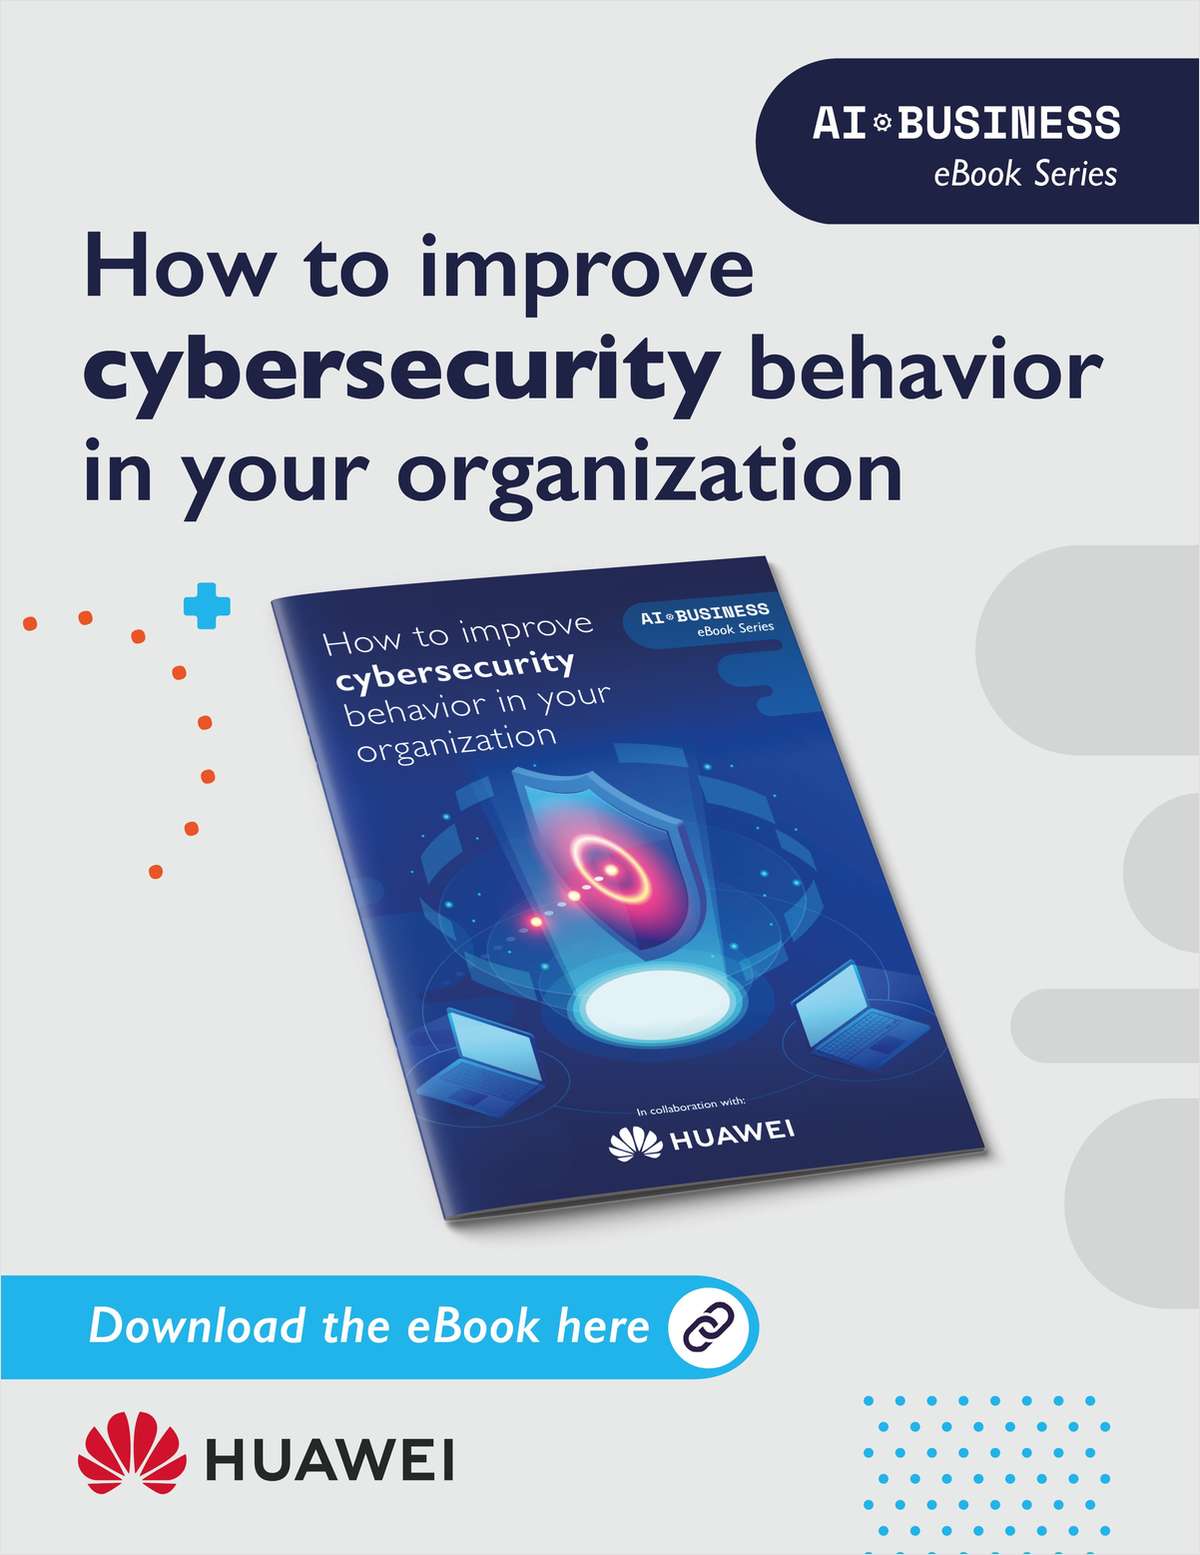 How to improve cybersecurity behavior in your organization